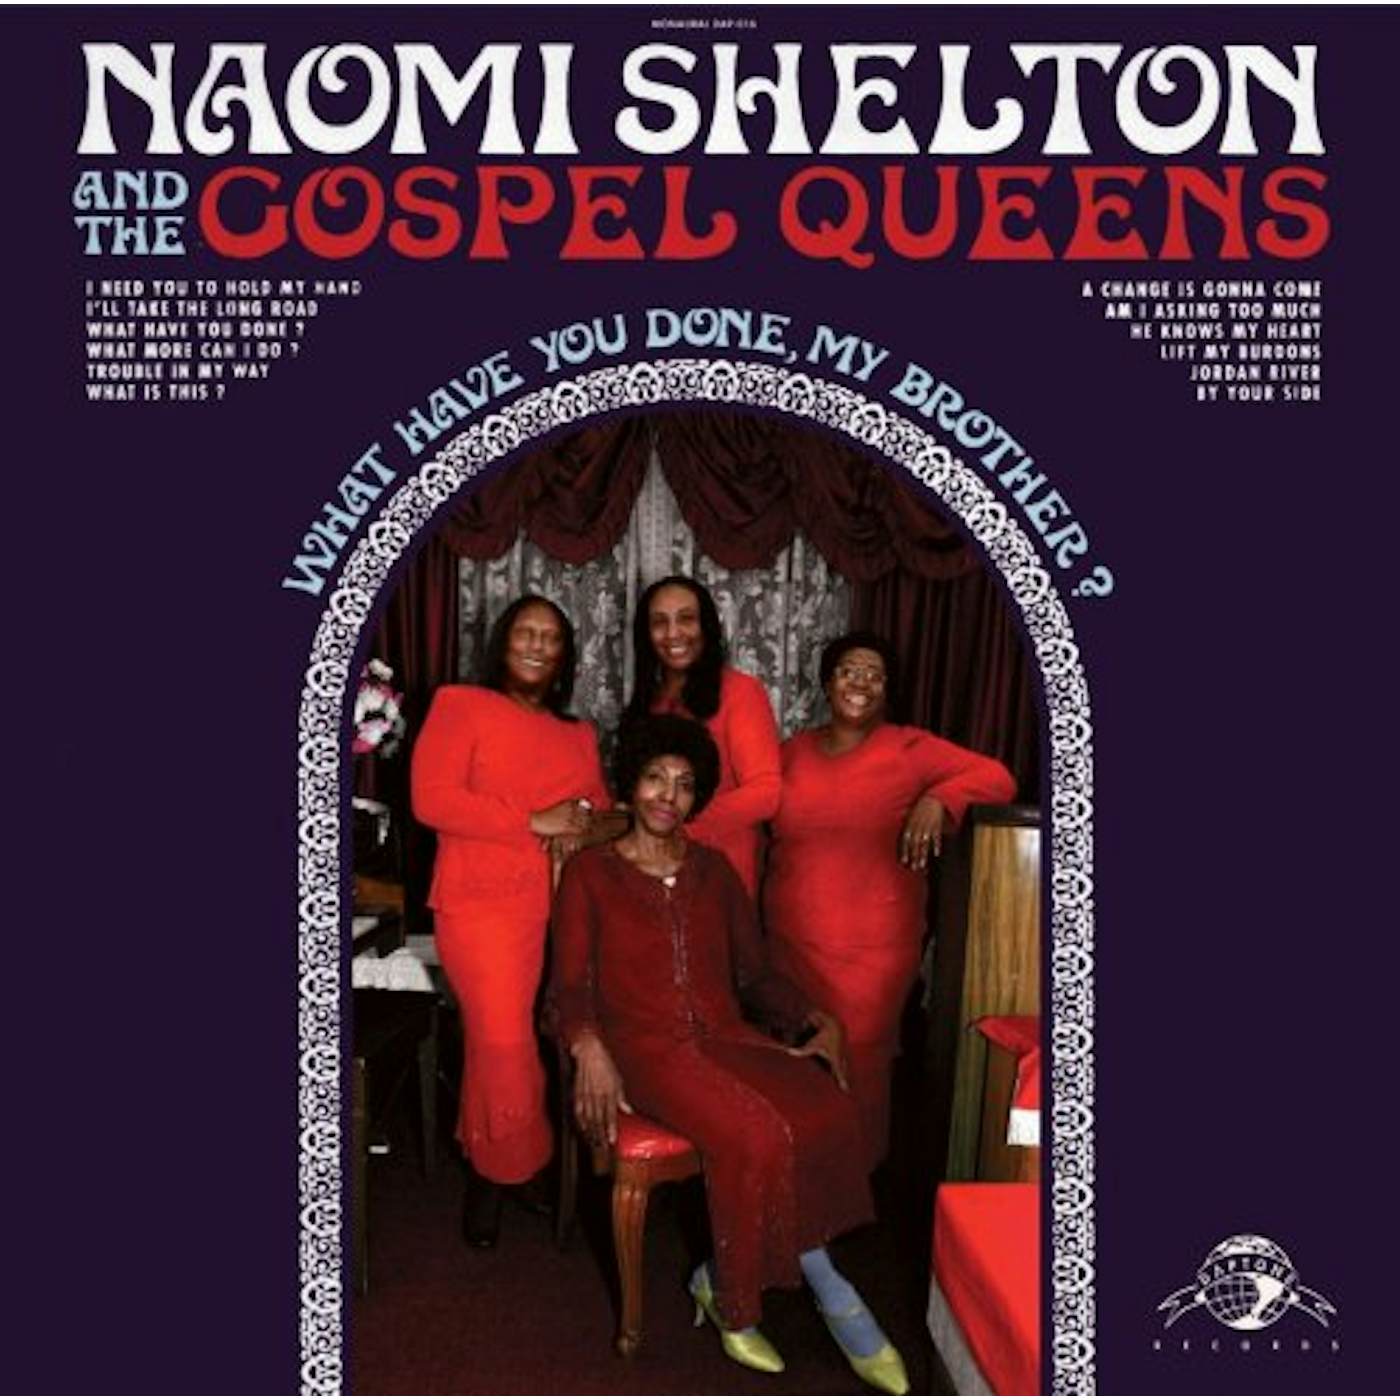 Naomi Shelton & the Gospel Queens WHAT HAVE YOU DONE MY BROTHER CD